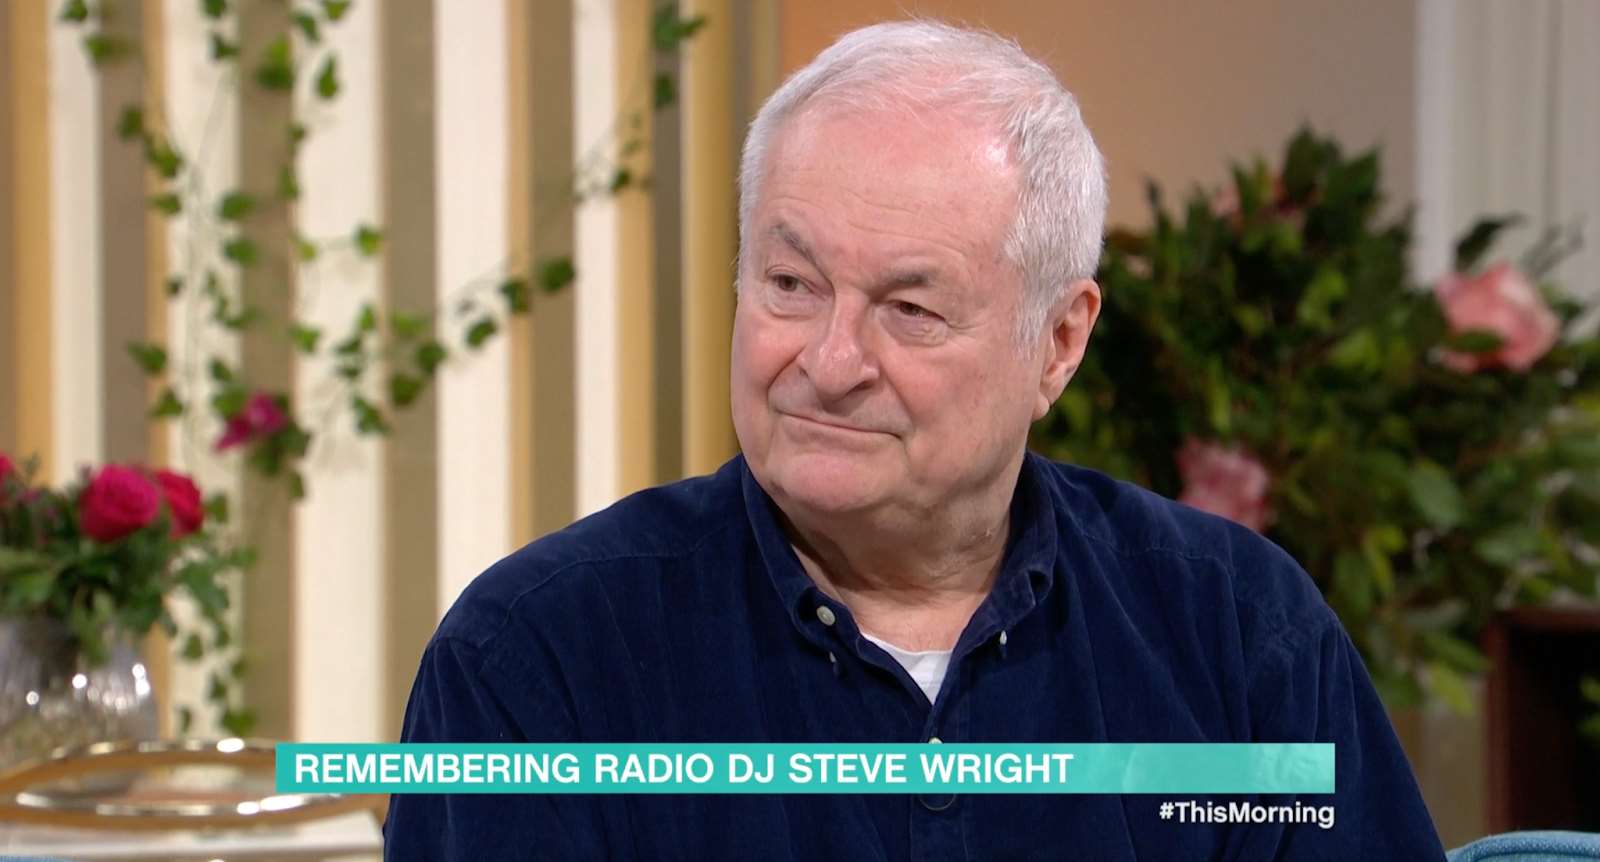 Paul Gambaccini spoke about his colleague Steve Wright on ITV’s This Morning (ITV/This Morning/PA)